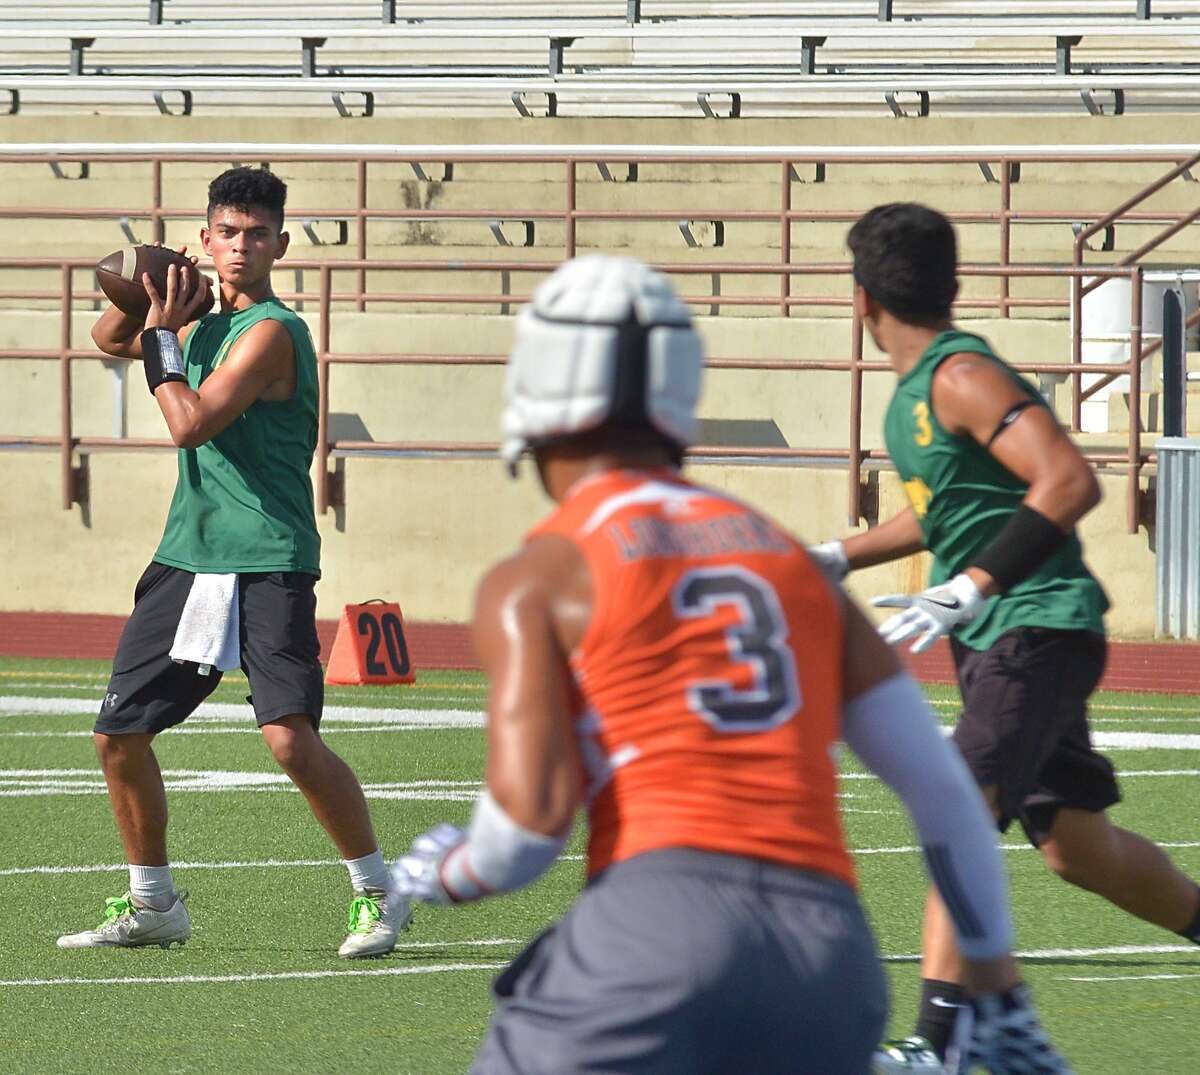 Nixon squares off with United South and Cigarroa during Week 5 of summer league 7on7 football.